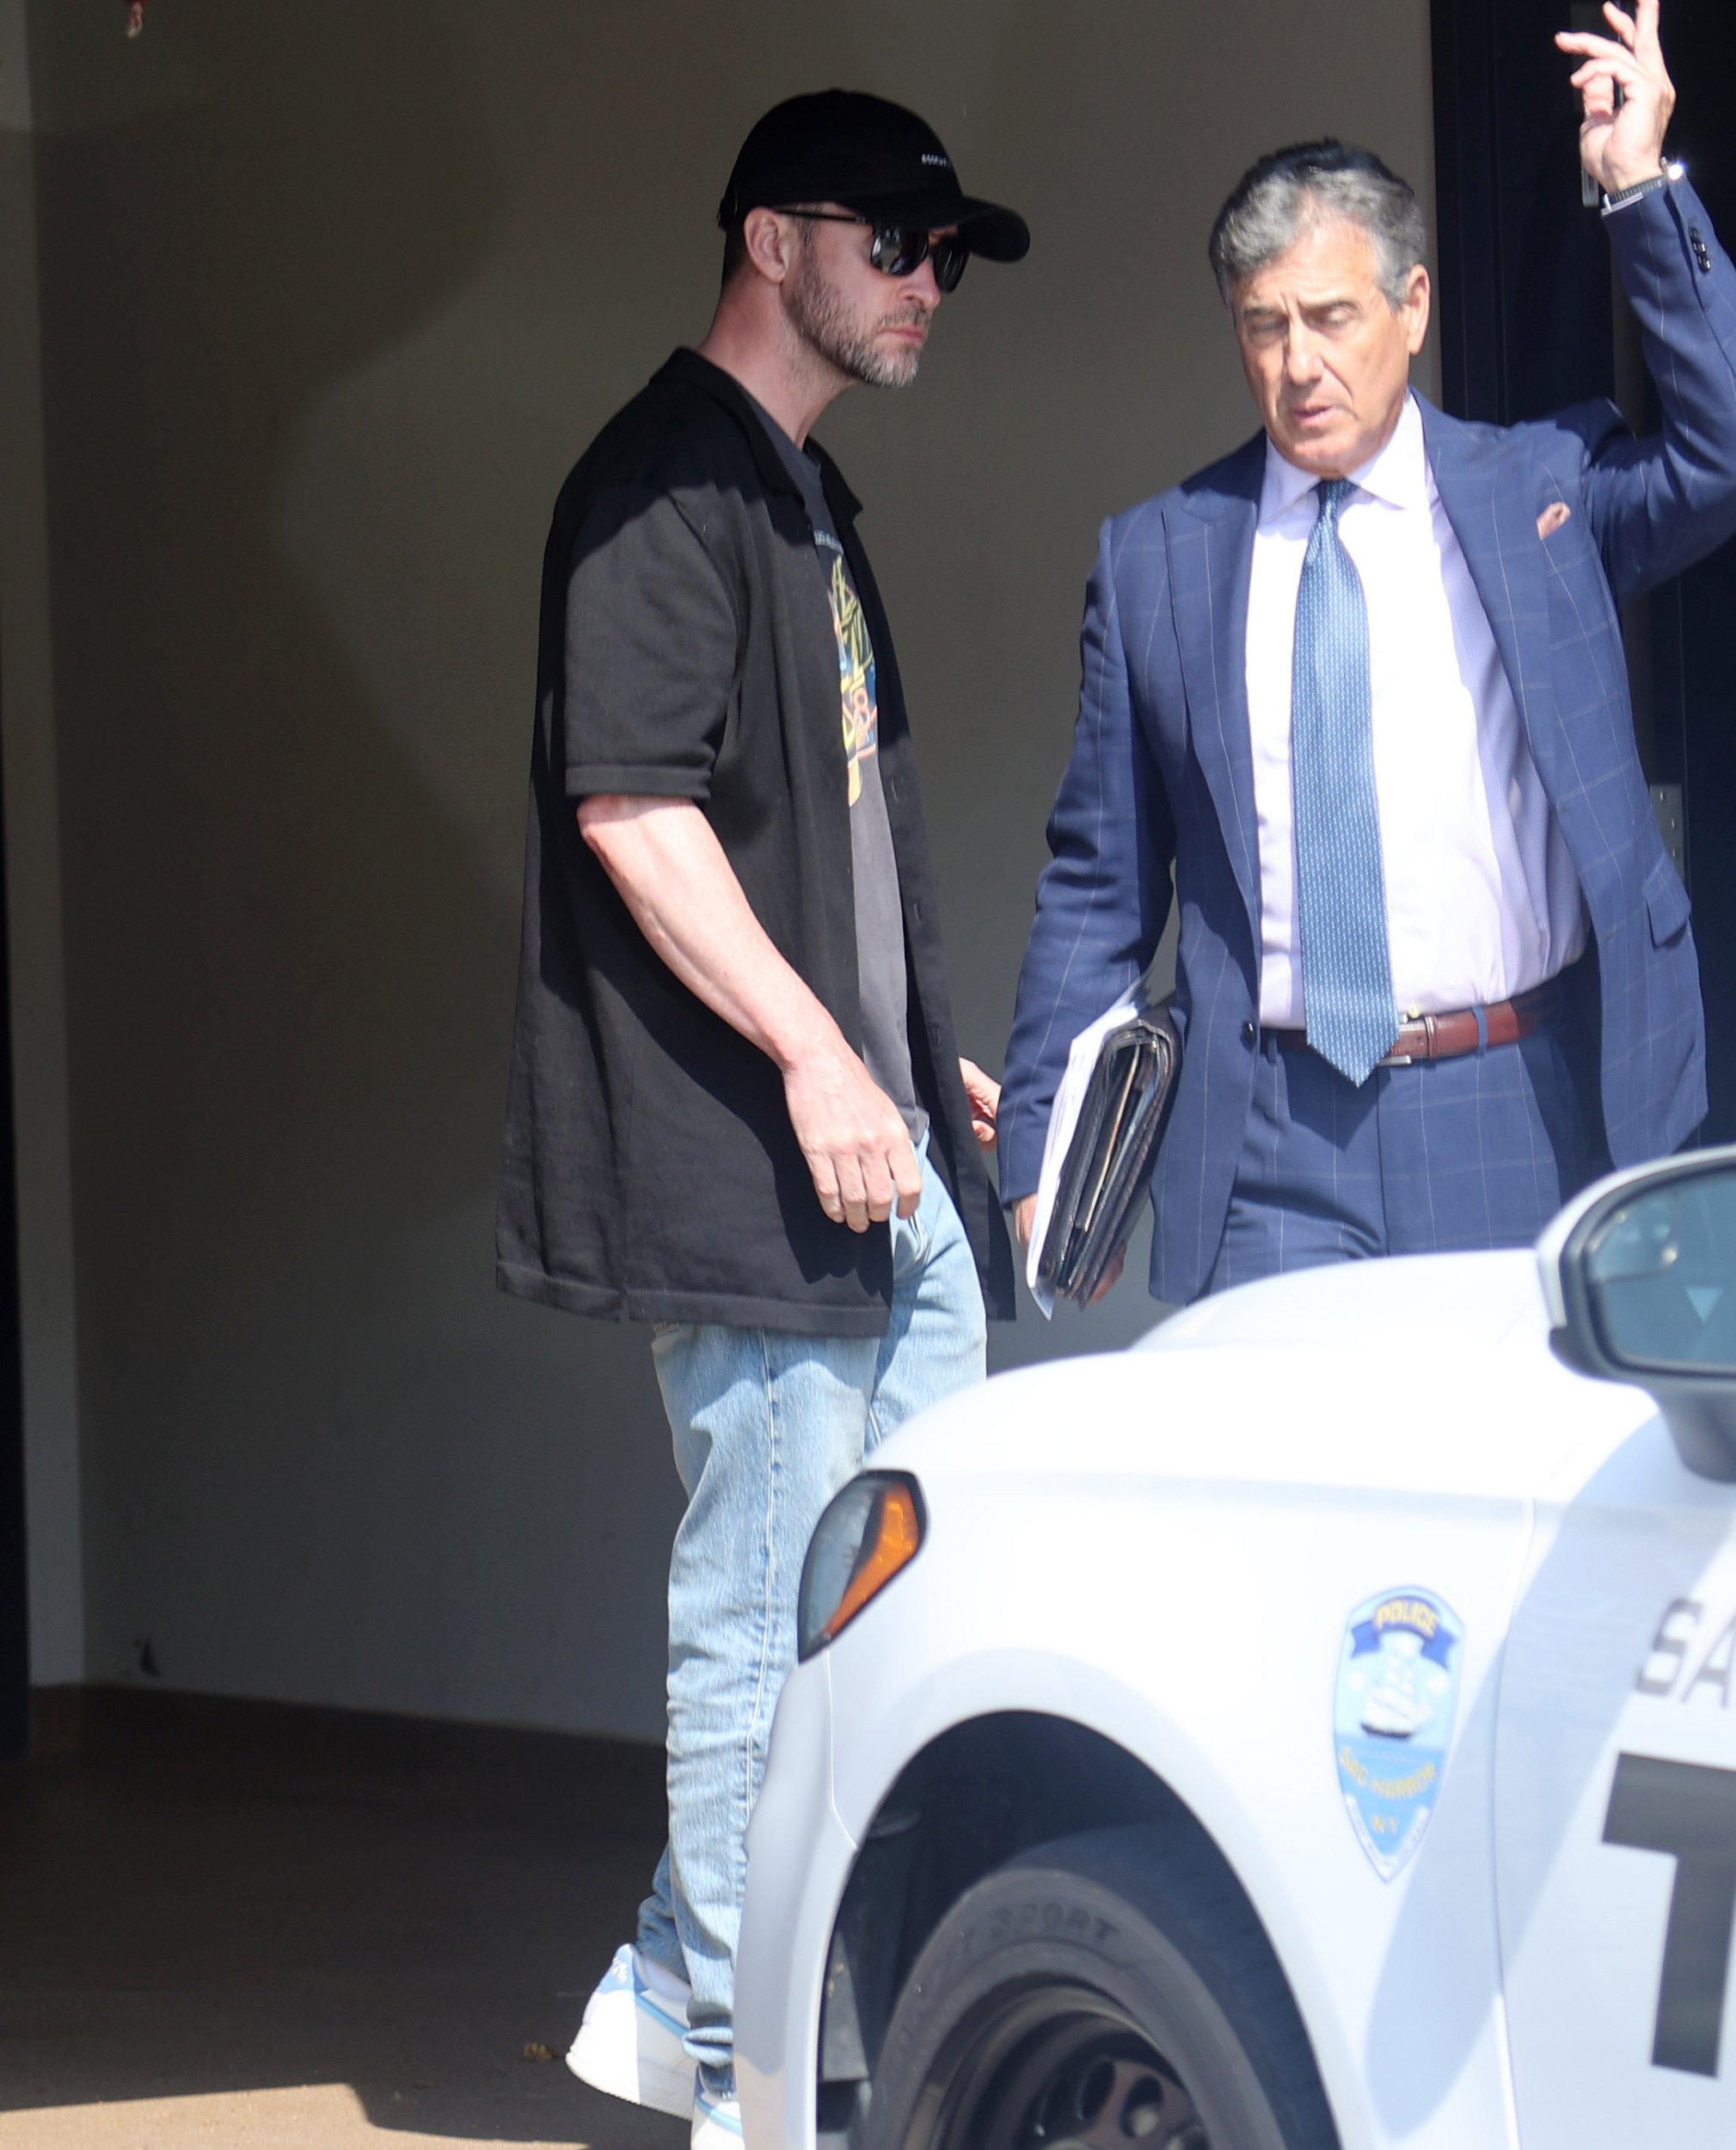 Timberlake was pictured leaving the police station